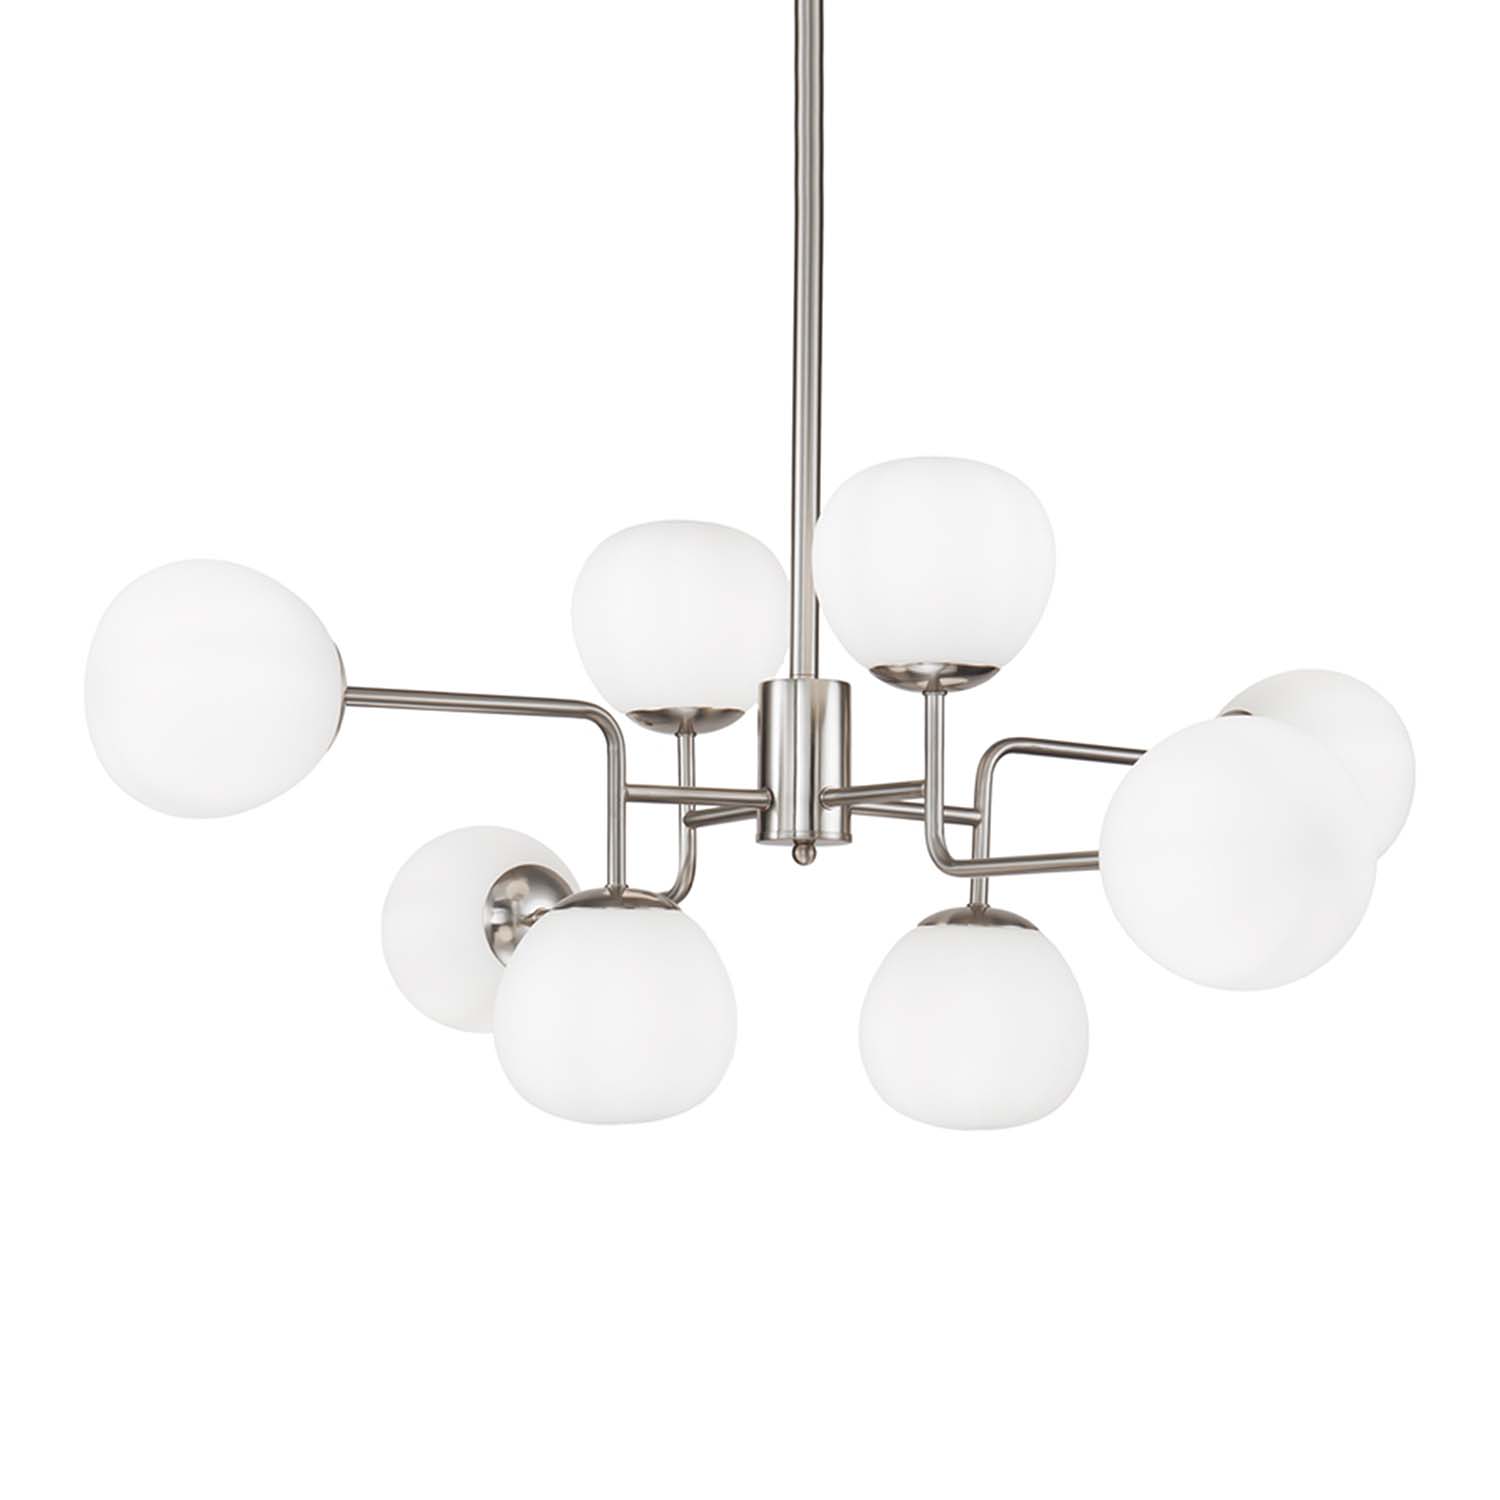 ERICH A - Gold or chrome art deco pendant lamp with glass balls